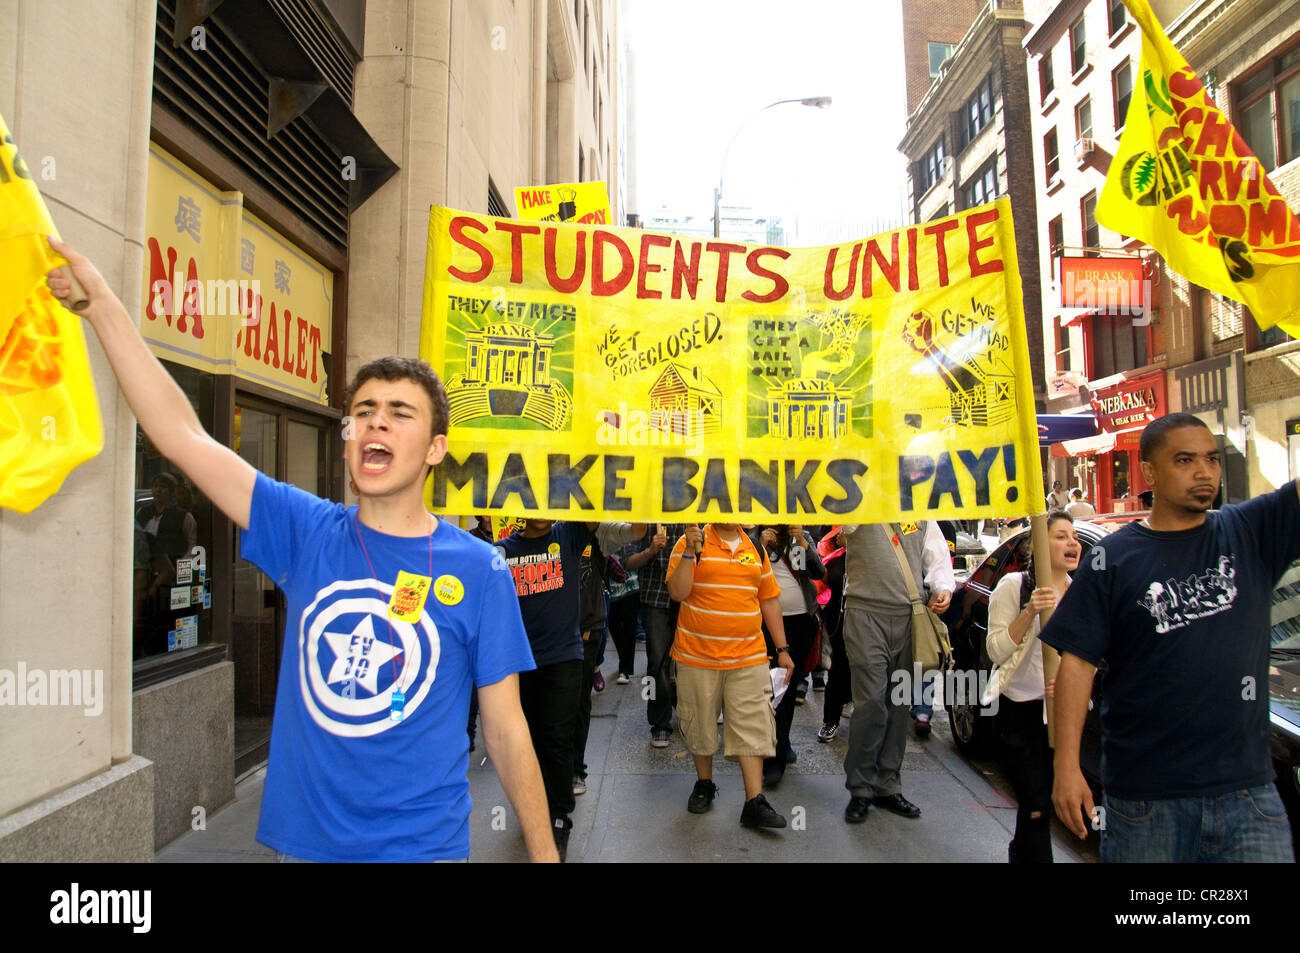 May 12, 2011, Financial District Wall Street vicinity, New York City, a protest against big banks, war, Stock Photo